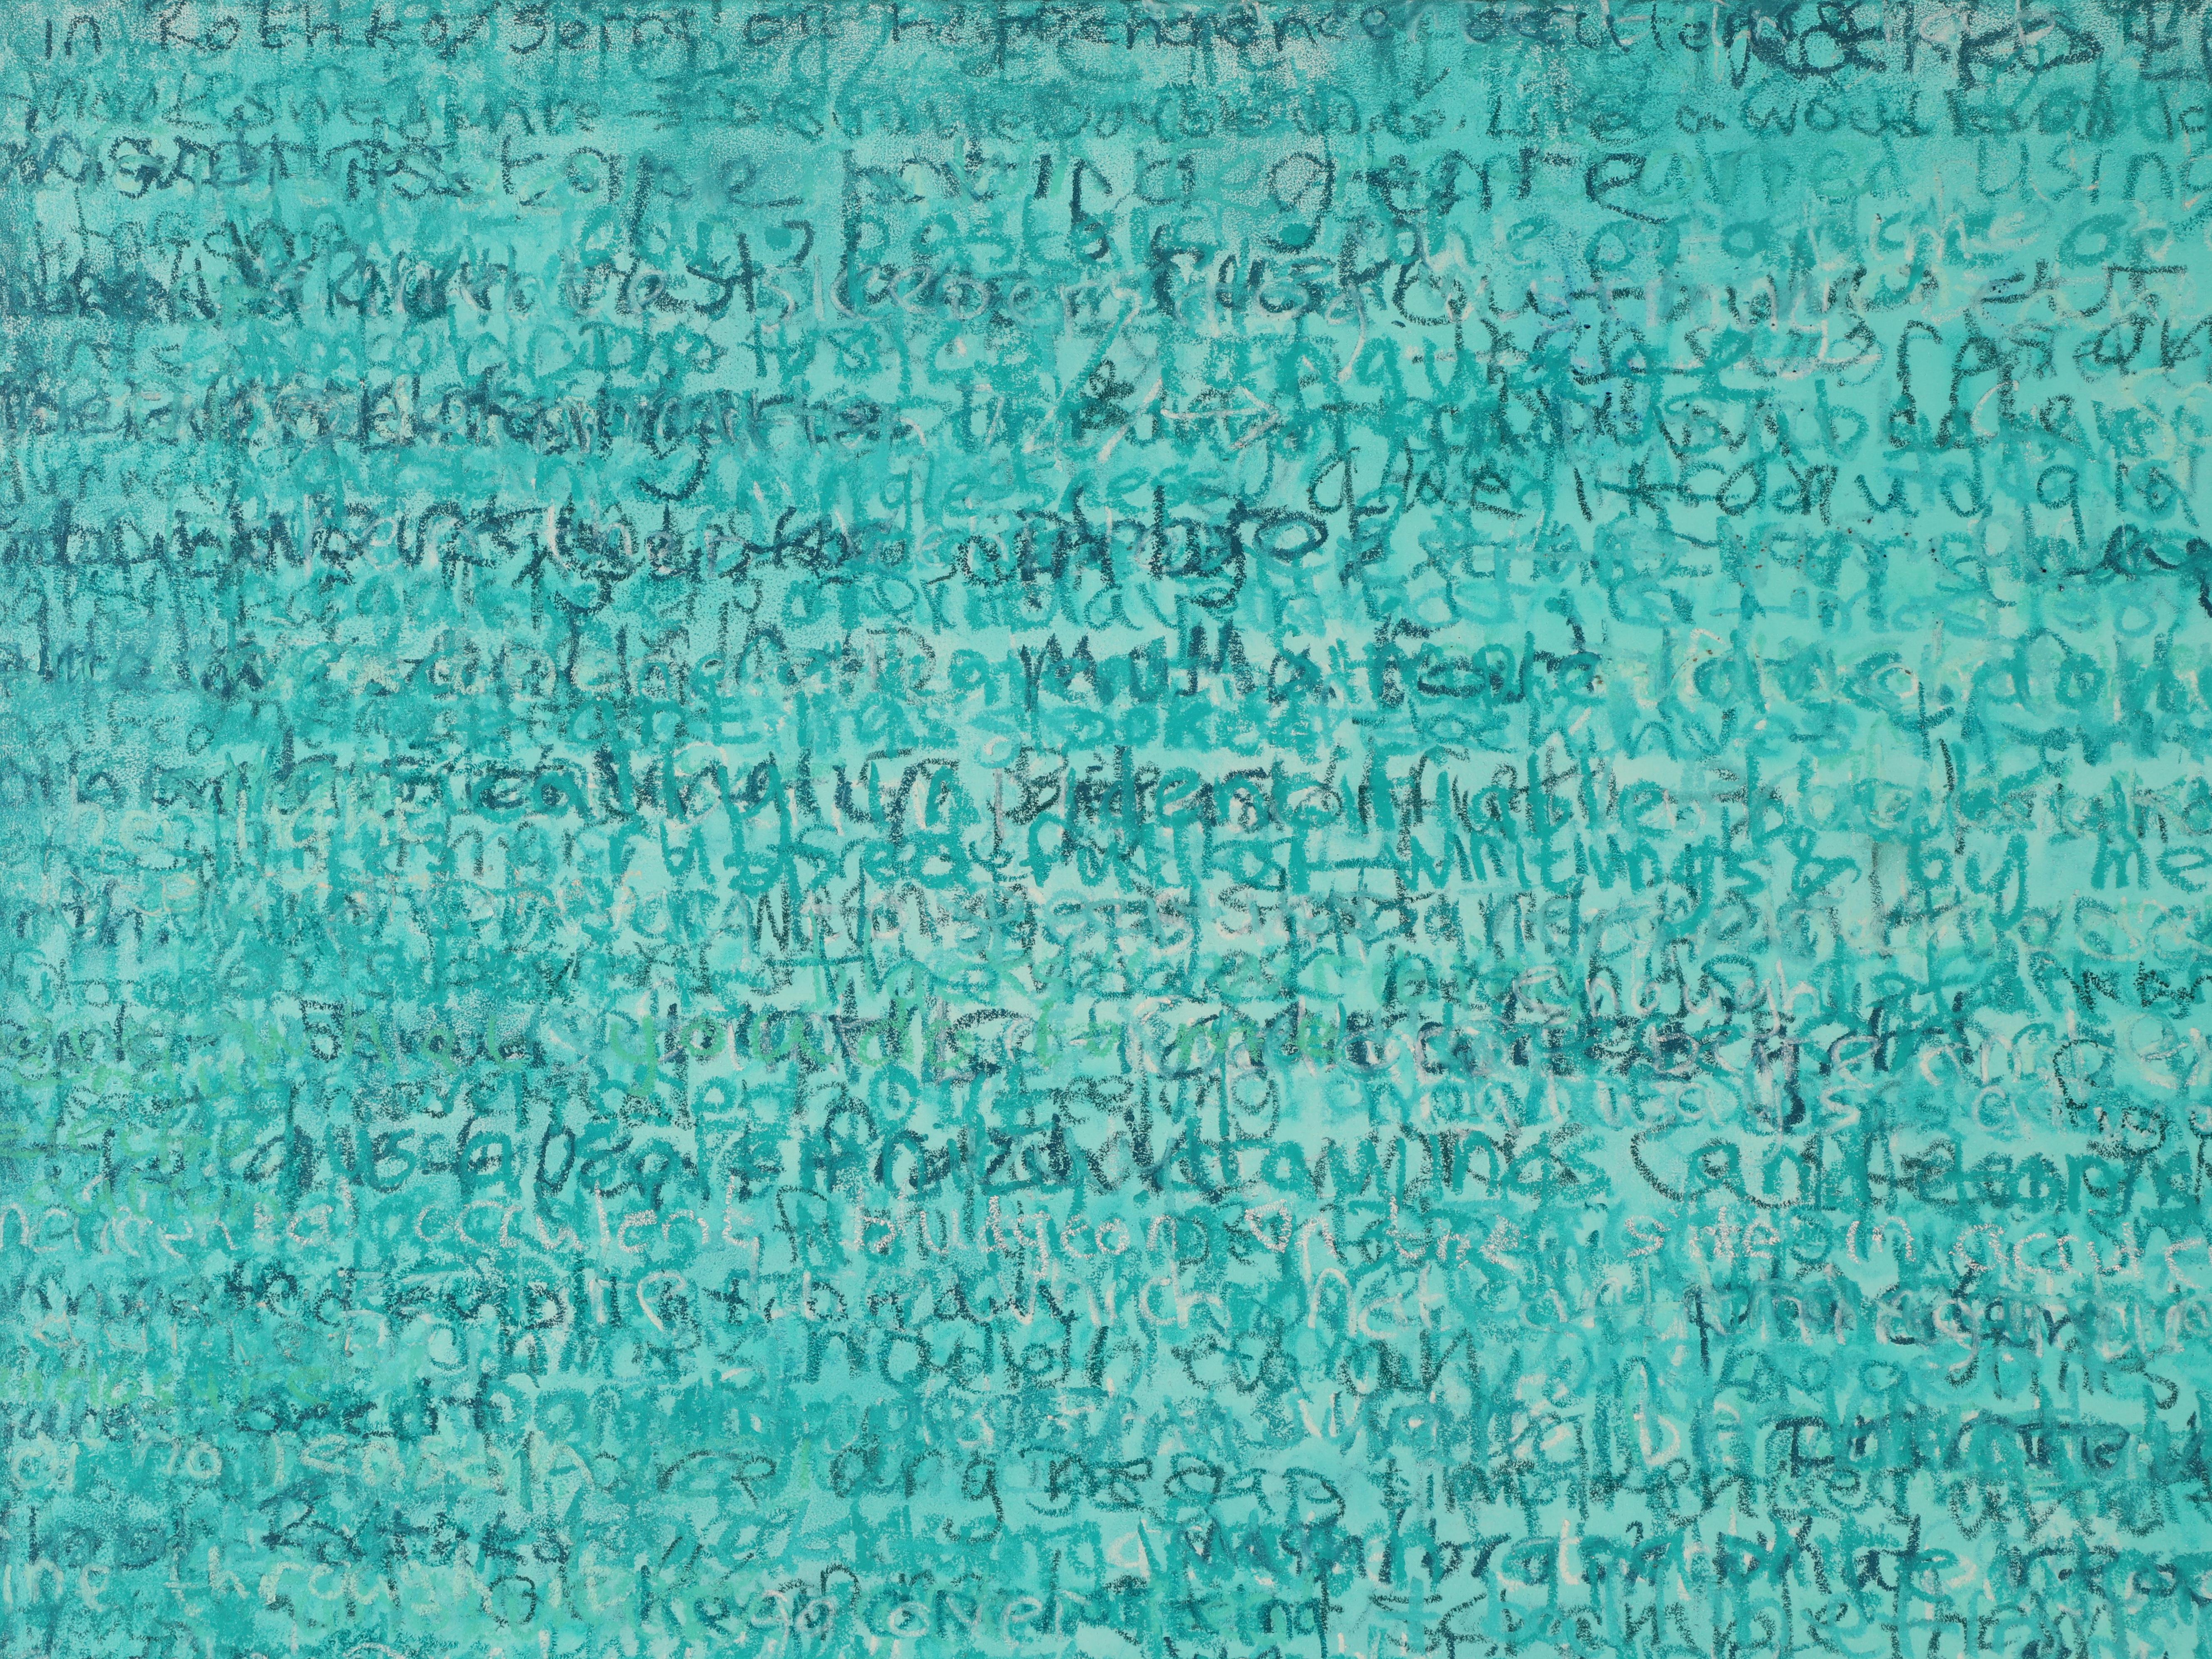 Green Proto Writing - Abstract Impressionist Painting by Edward Povey